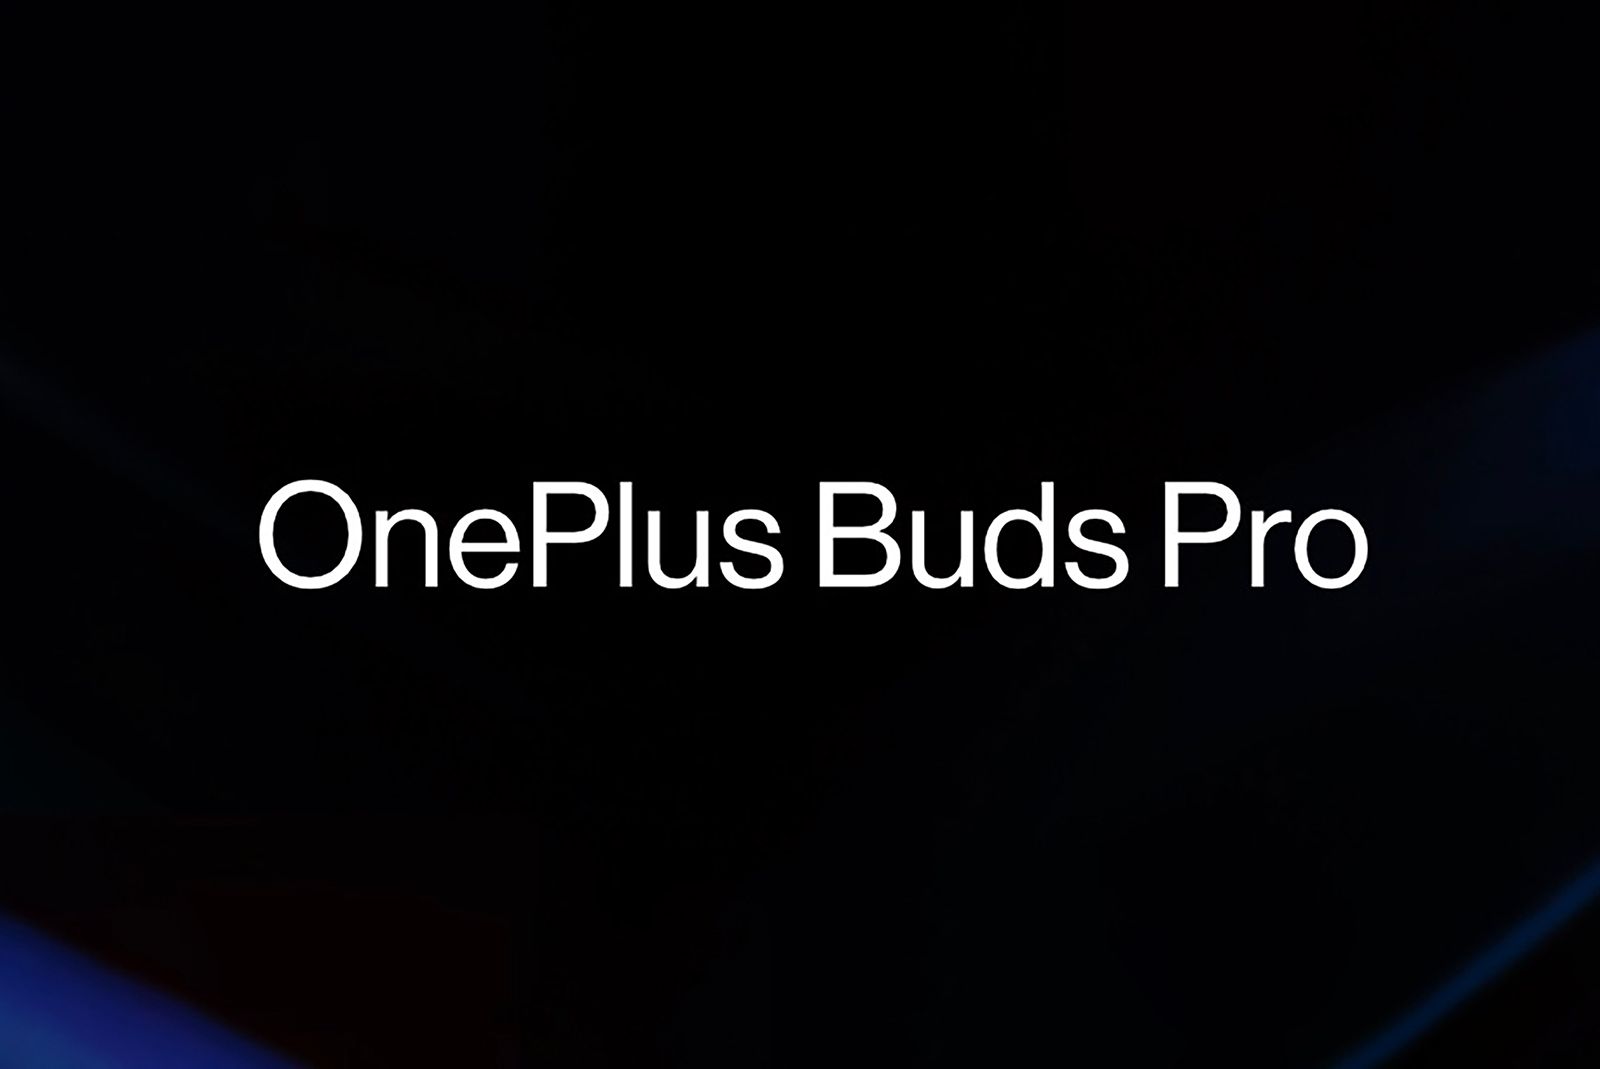 OnePlus is making Buds Pro earbuds: How to apply to test them photo 1